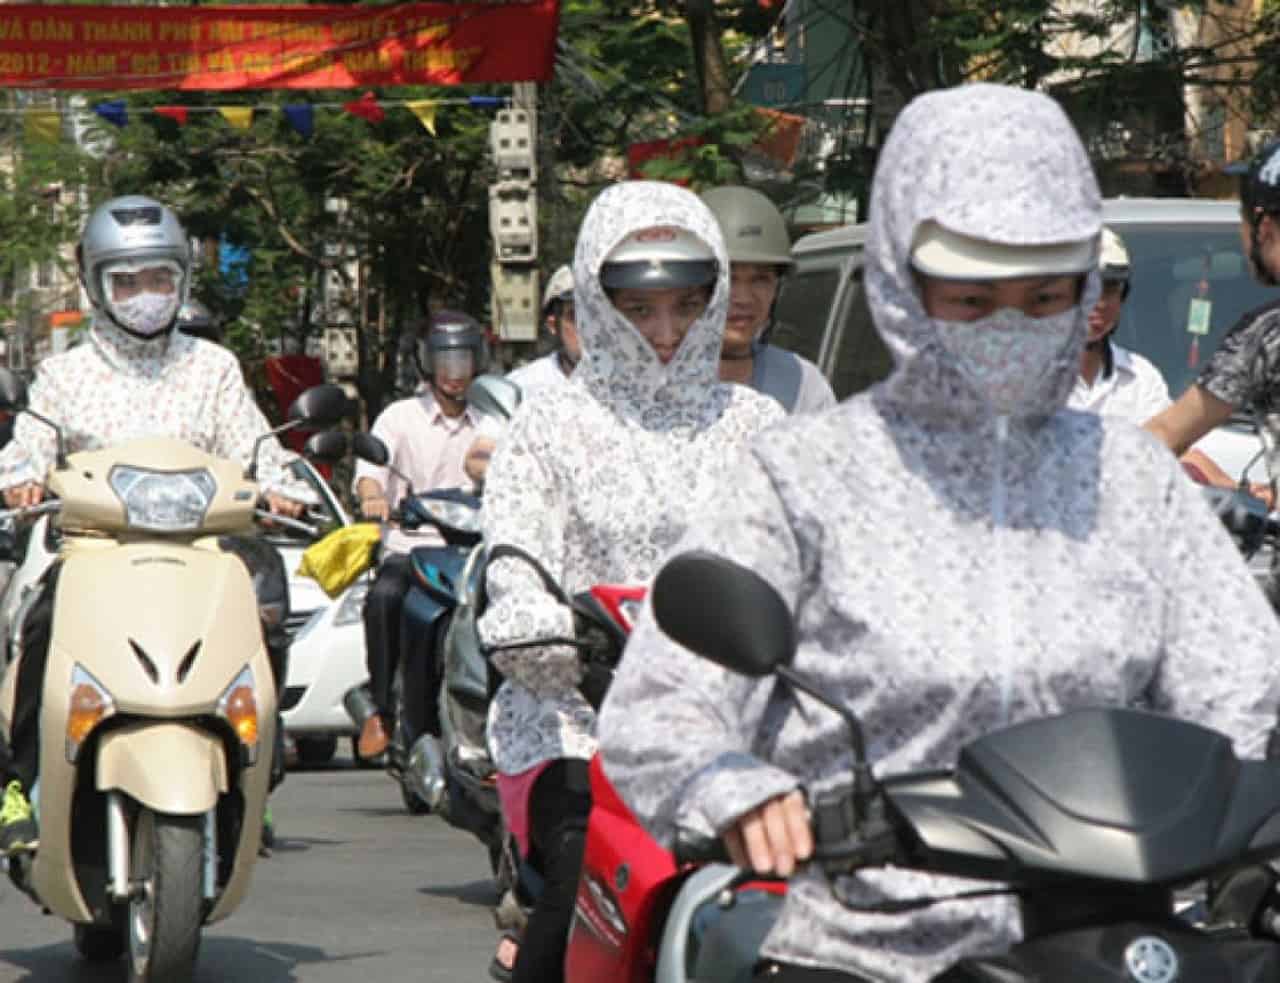 Vietnamese motorbike drivers shielded from the sun